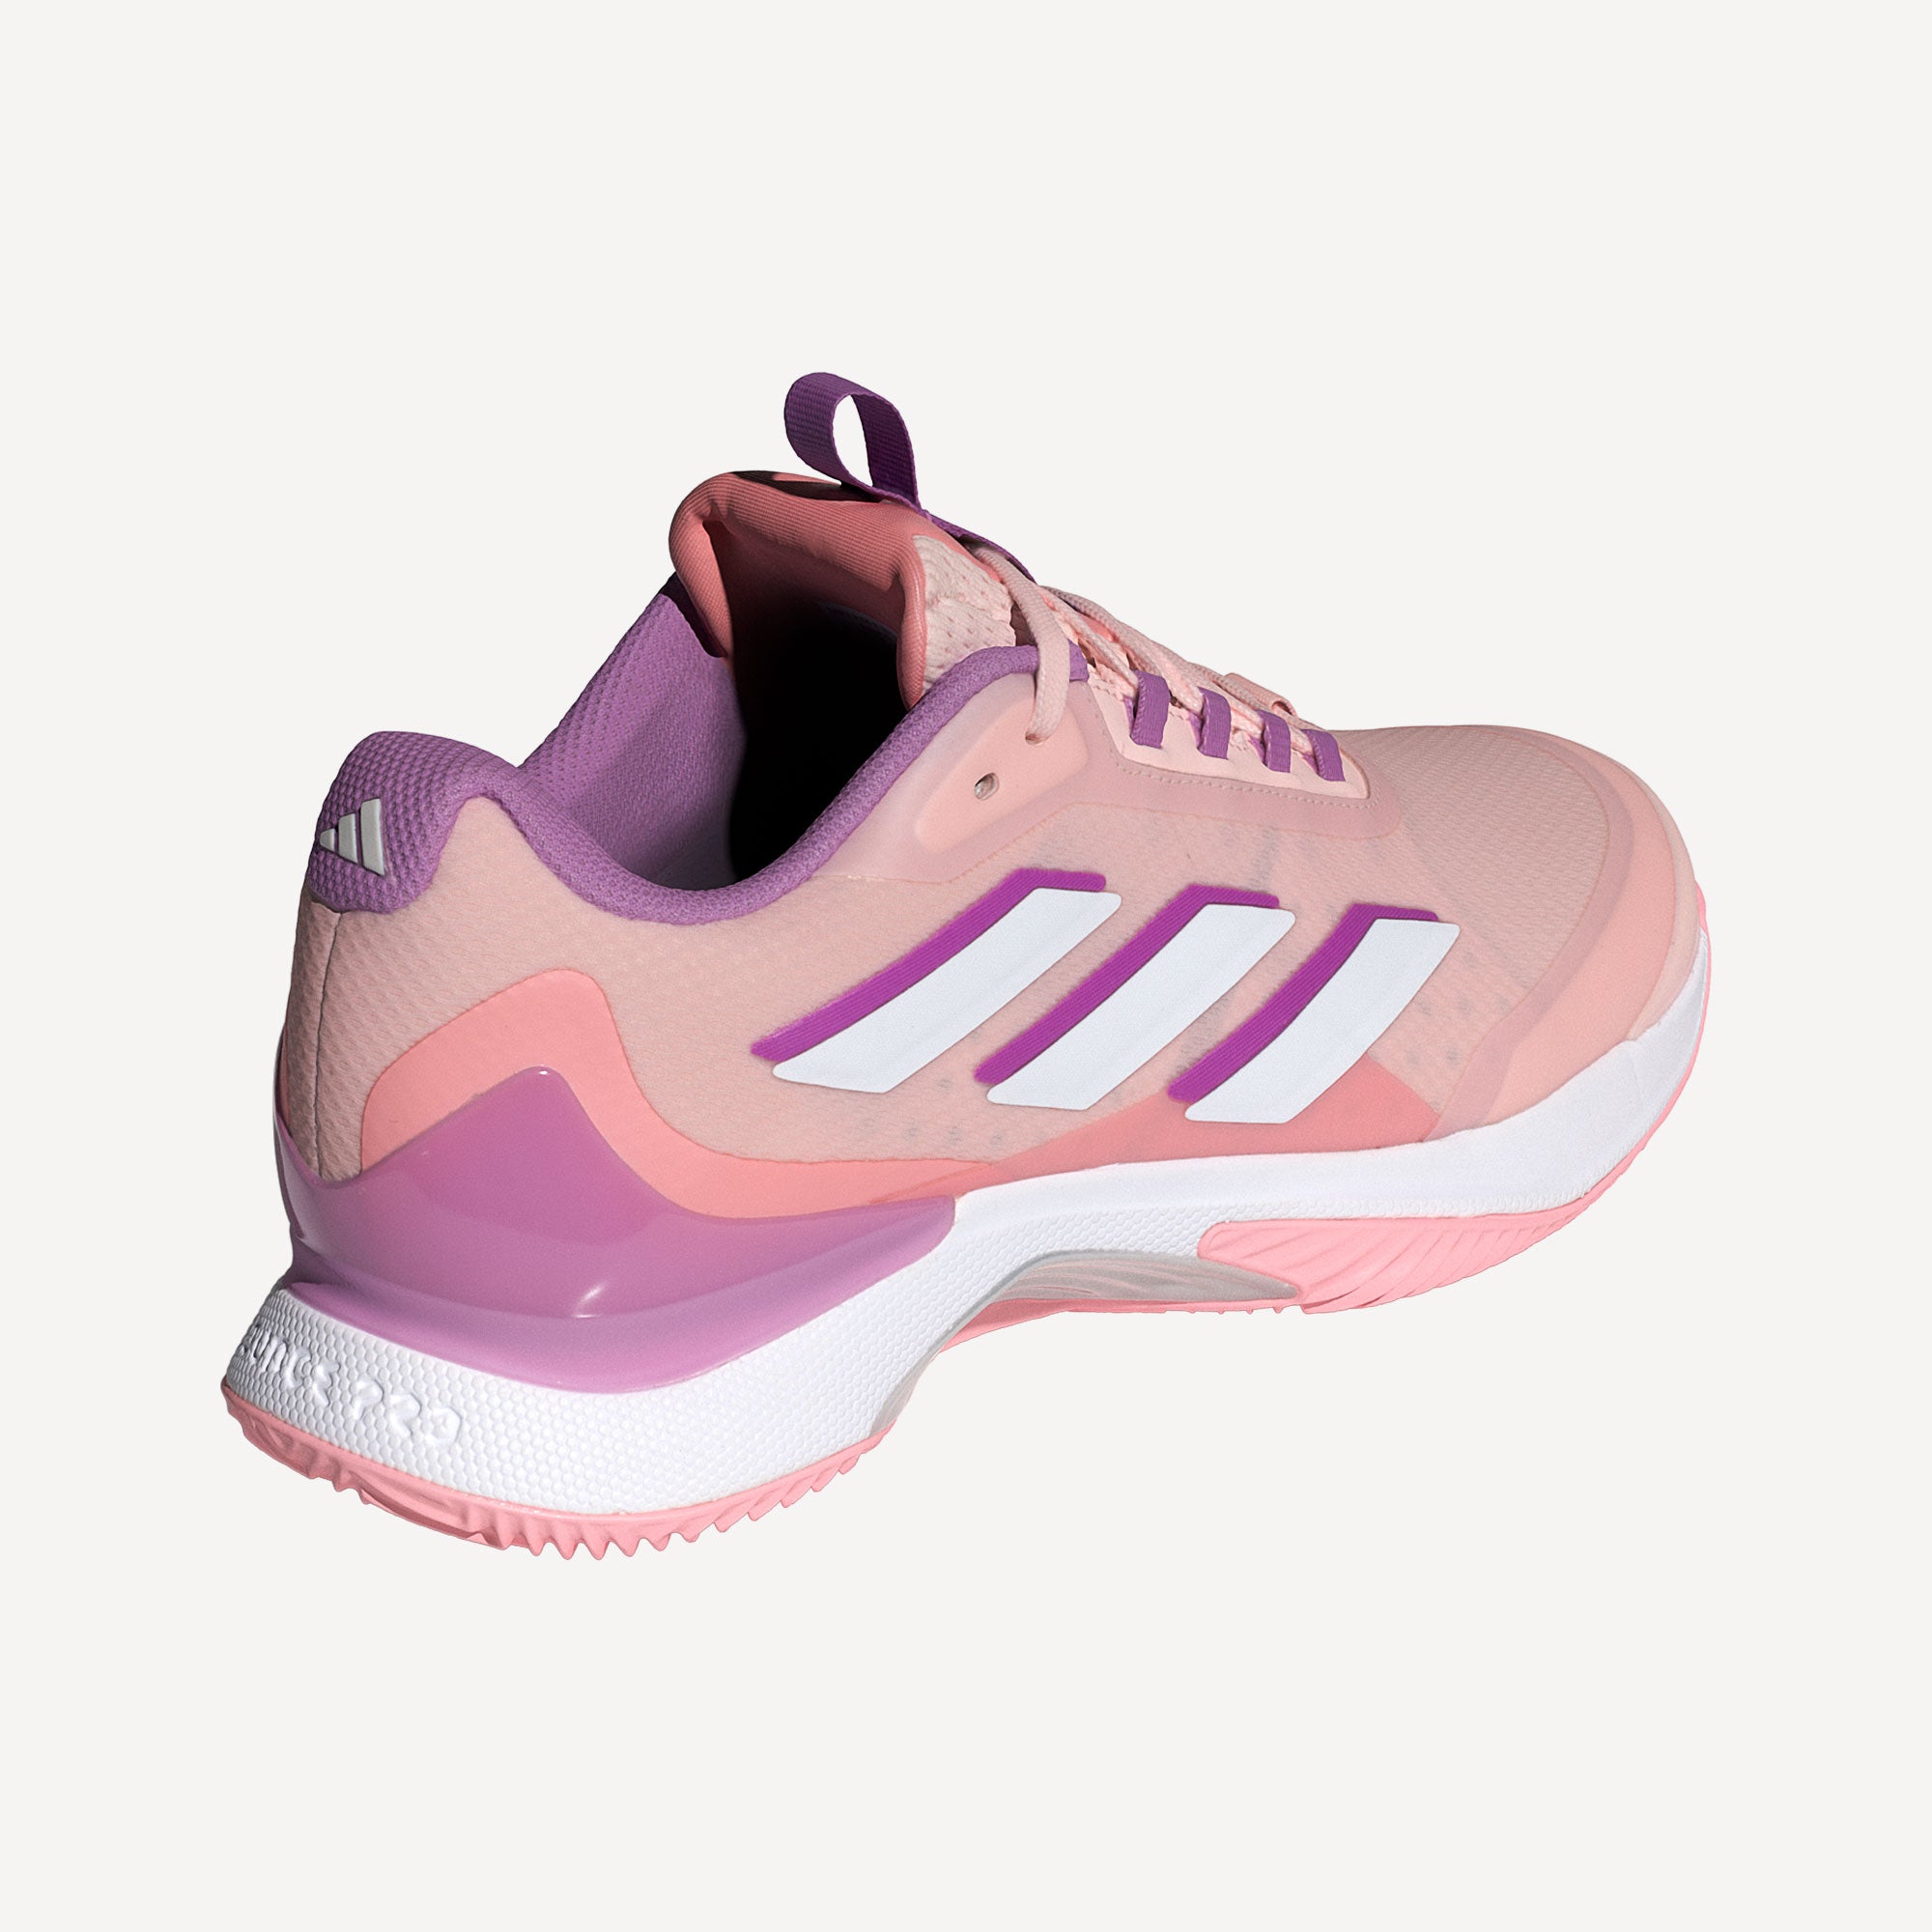 adidas Avacourt 2 Women's Clay Court Tennis Shoes - Pink (6)